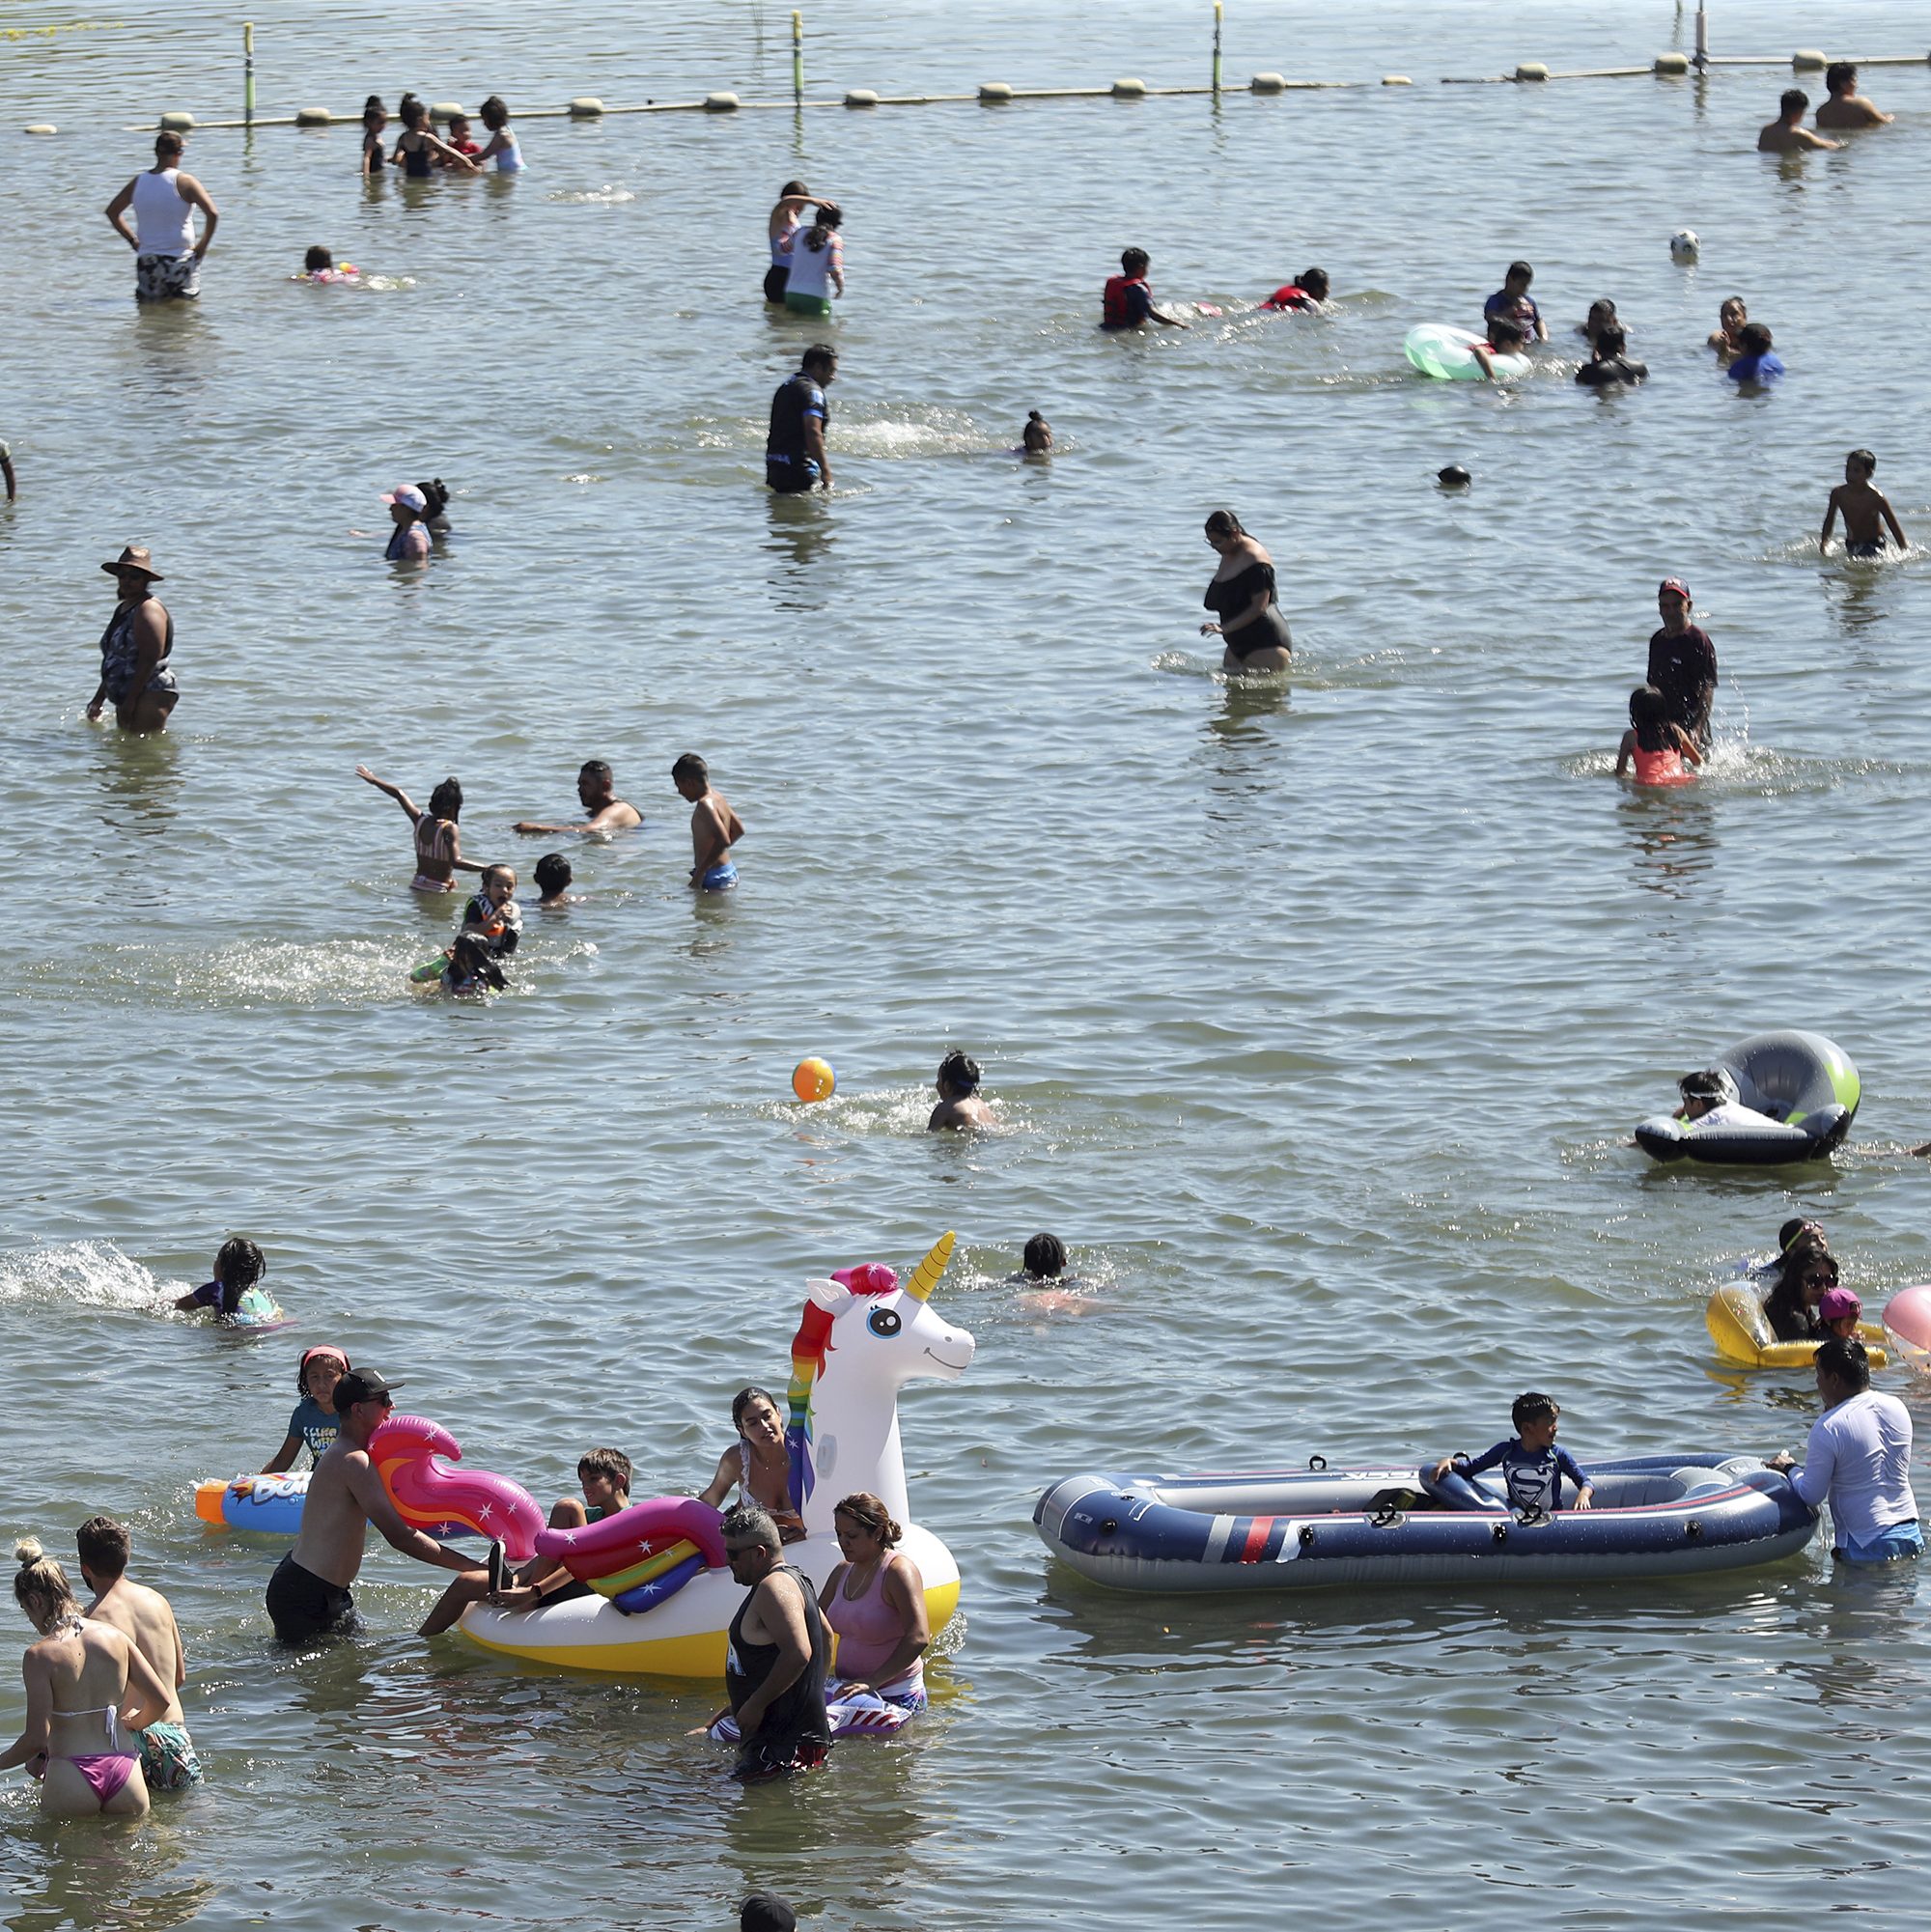 People of all ages enjoy a sunny day wading and swimming in a lake. Some float on colorful inflatable rafts, including a unicorn, while others splash and play in the water.